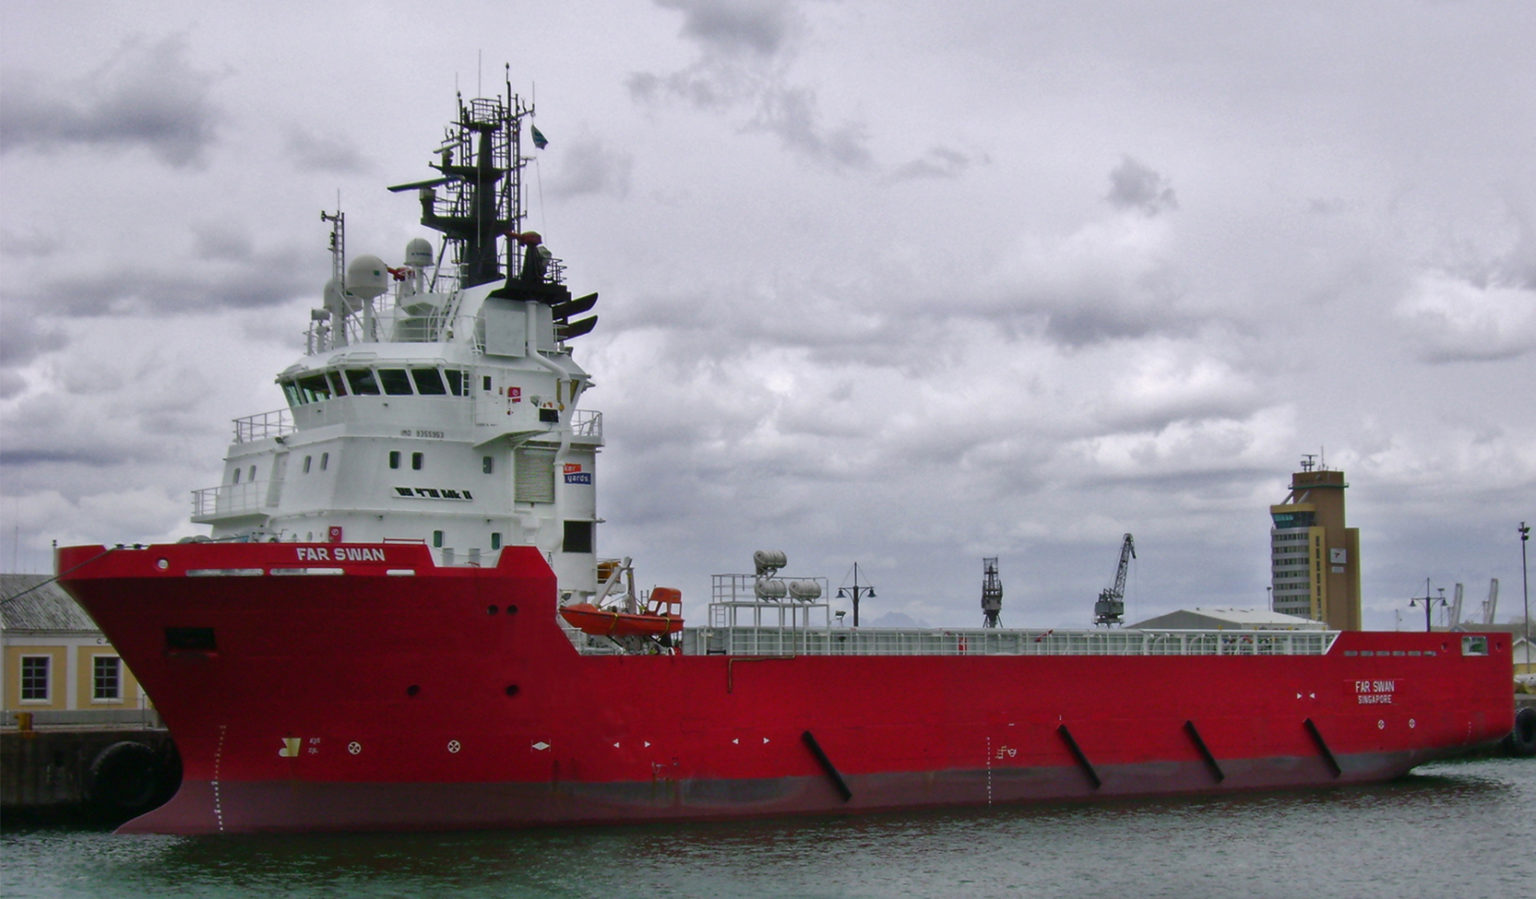 Solstad sold another vessel